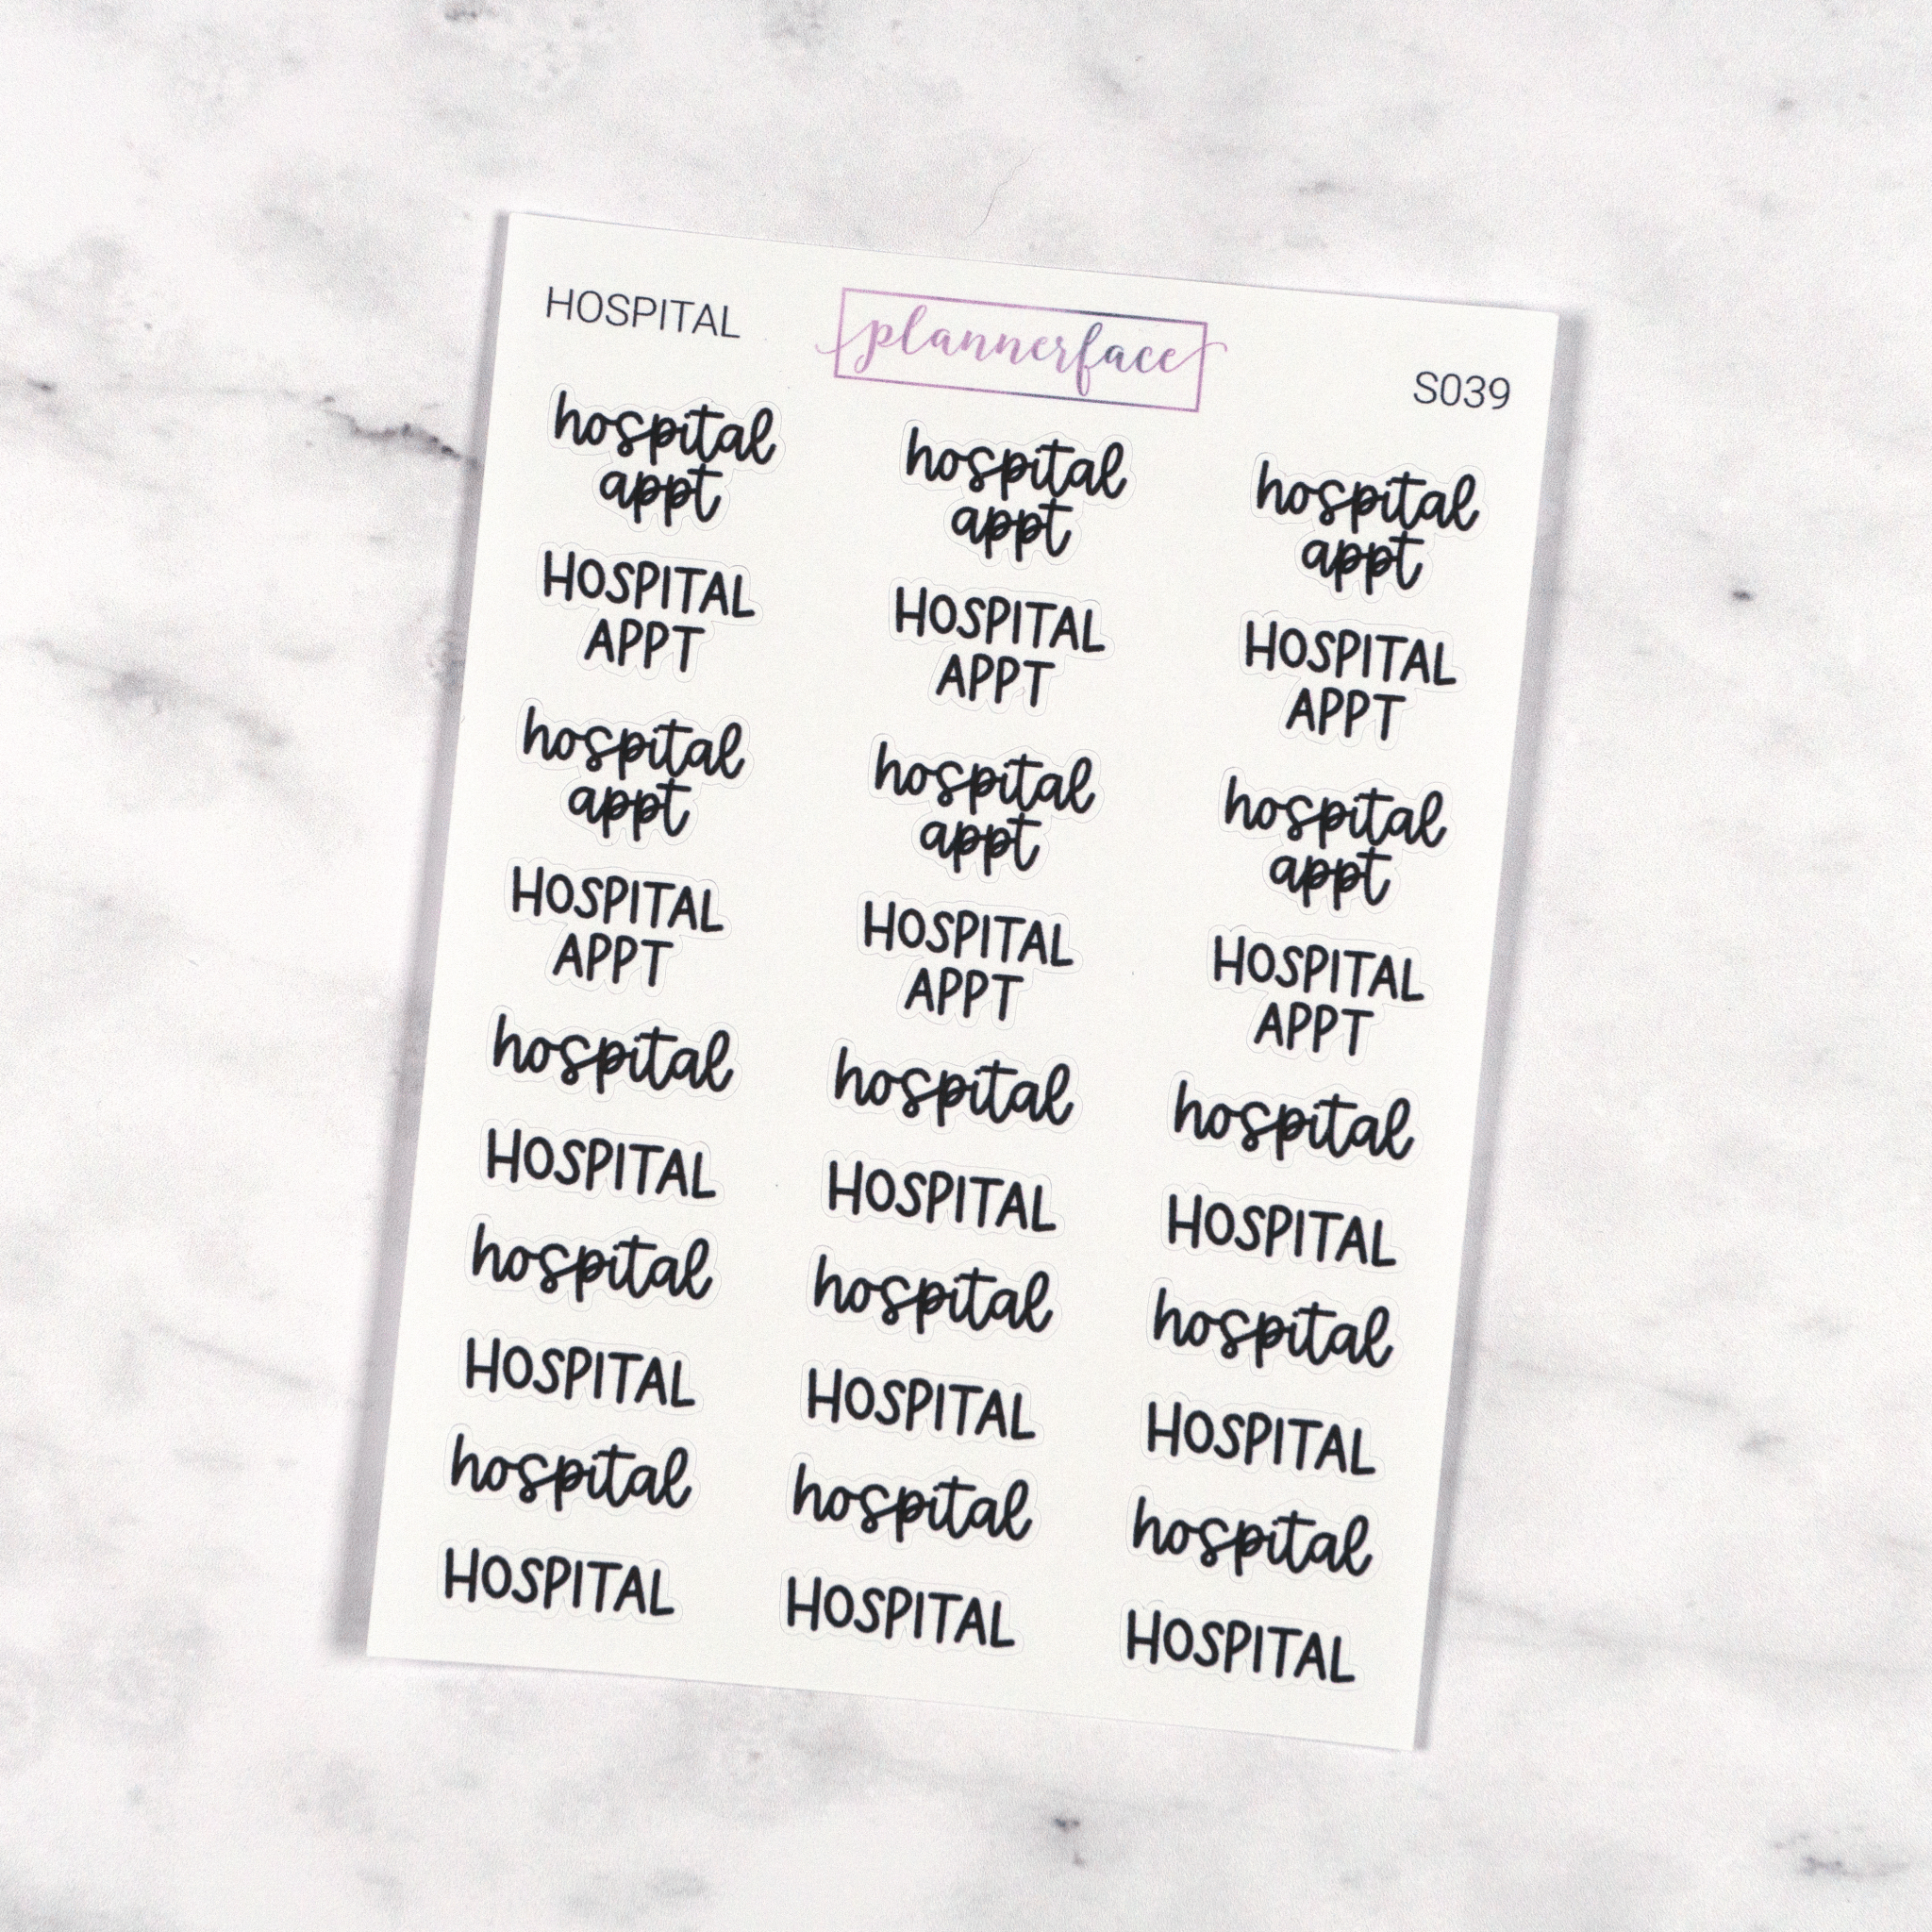 Hospital Appointment | Scripts by Plannerface